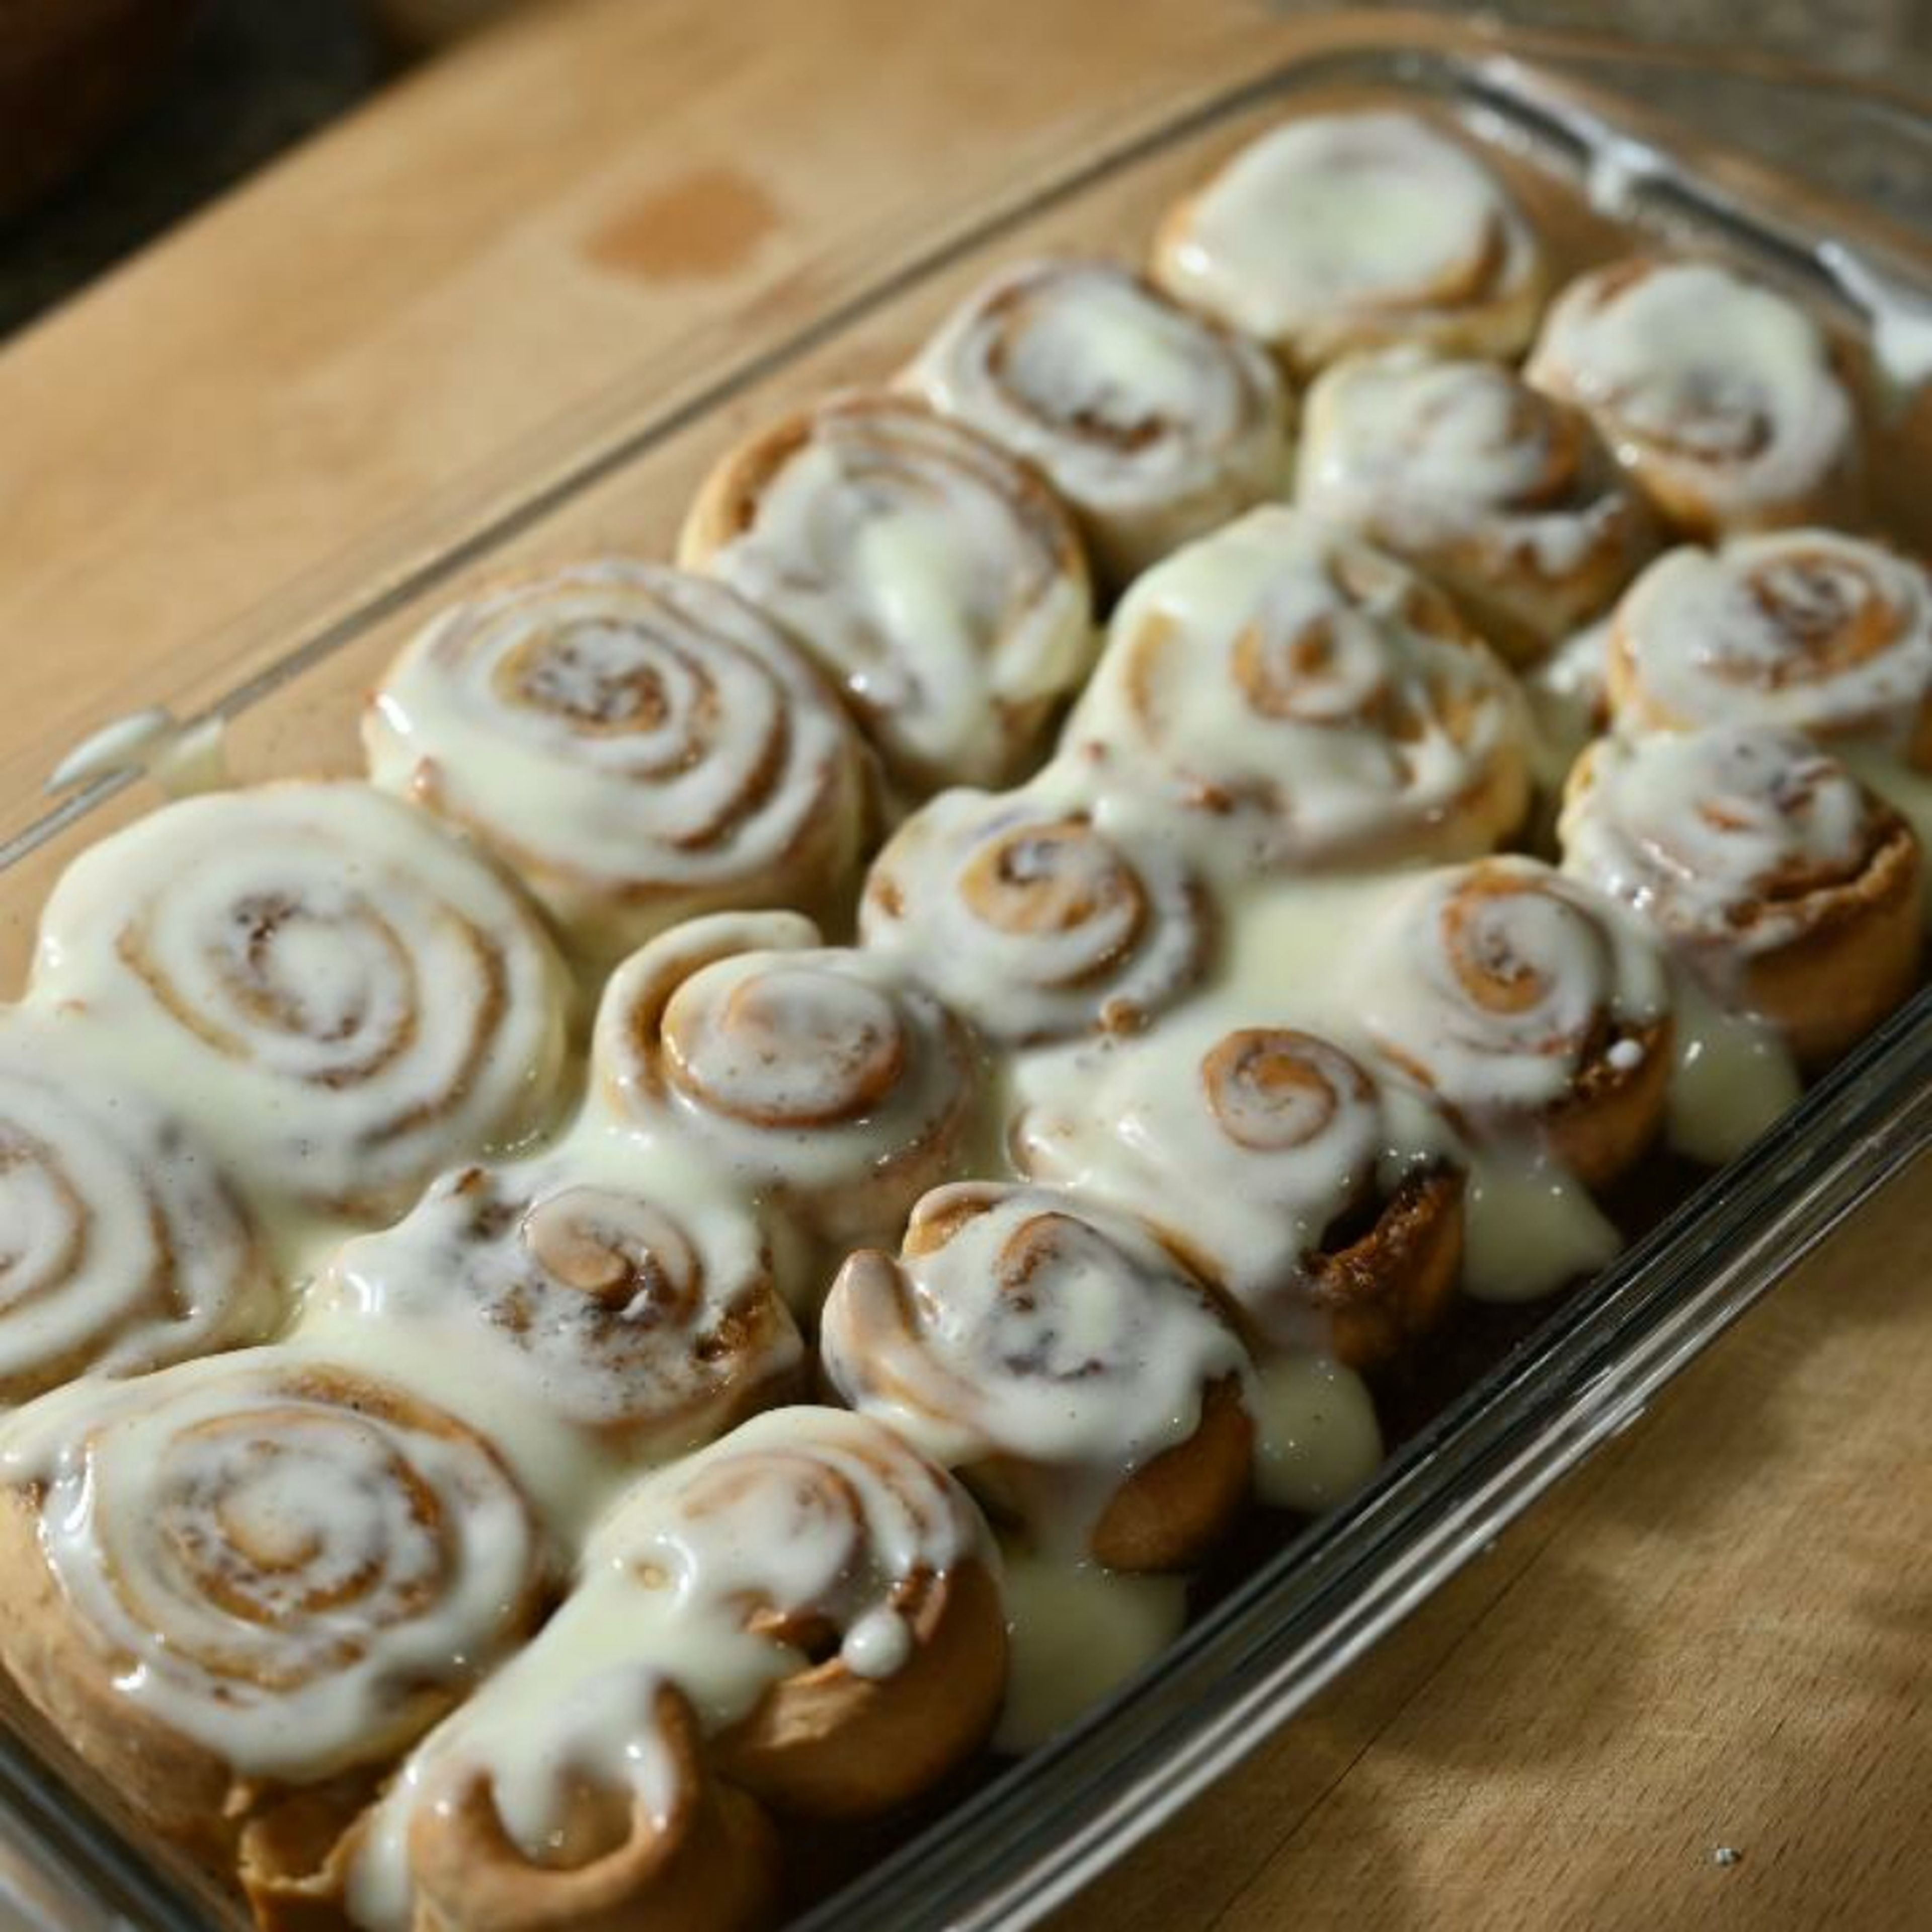 Drizzle the frosting over the cinnamon rolls.